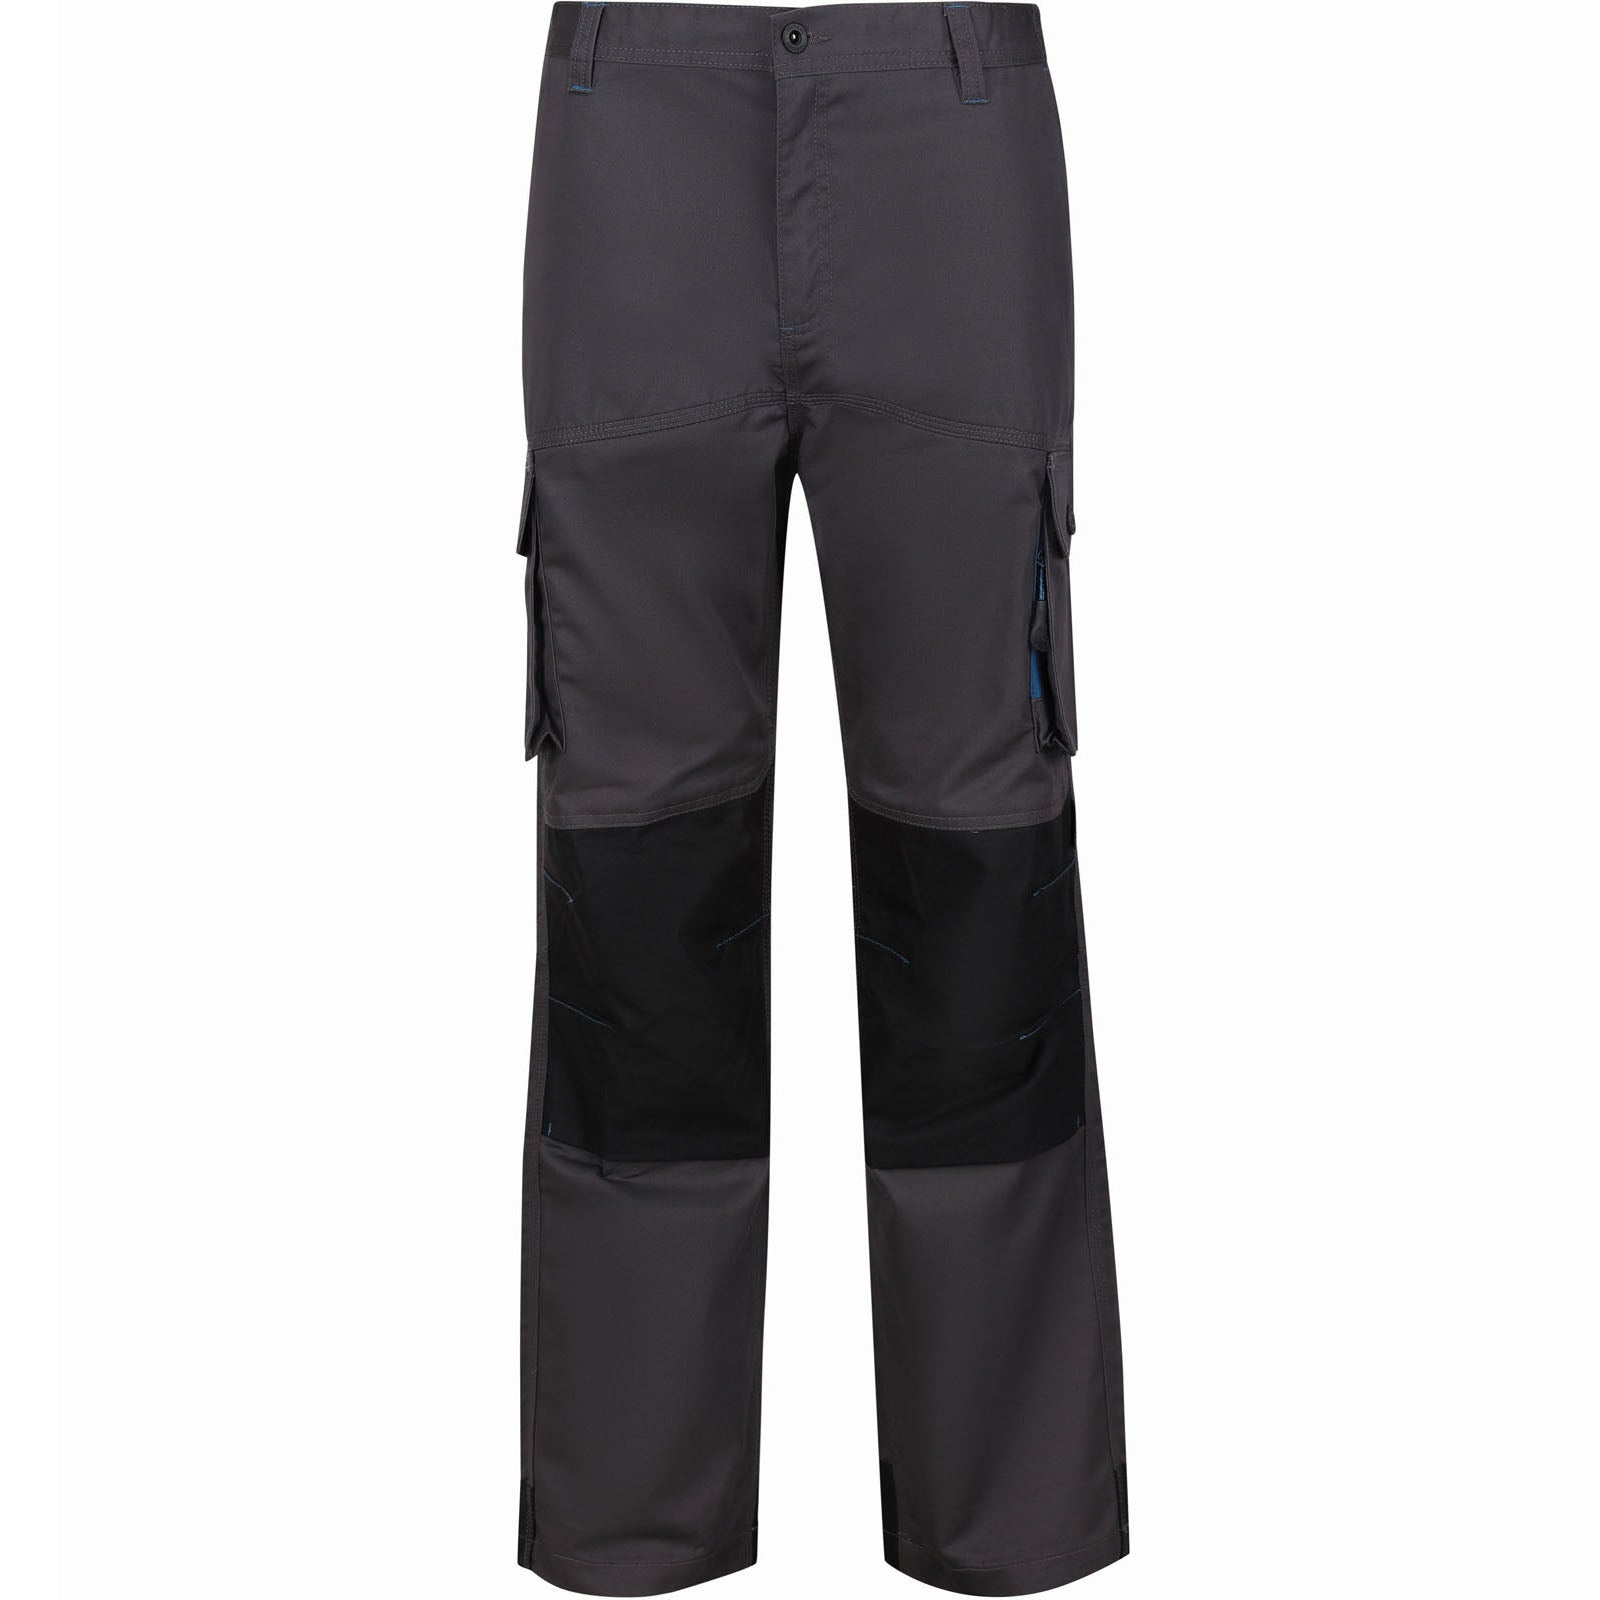 Promotional Trousers & Shorts | Promotional Warehouse